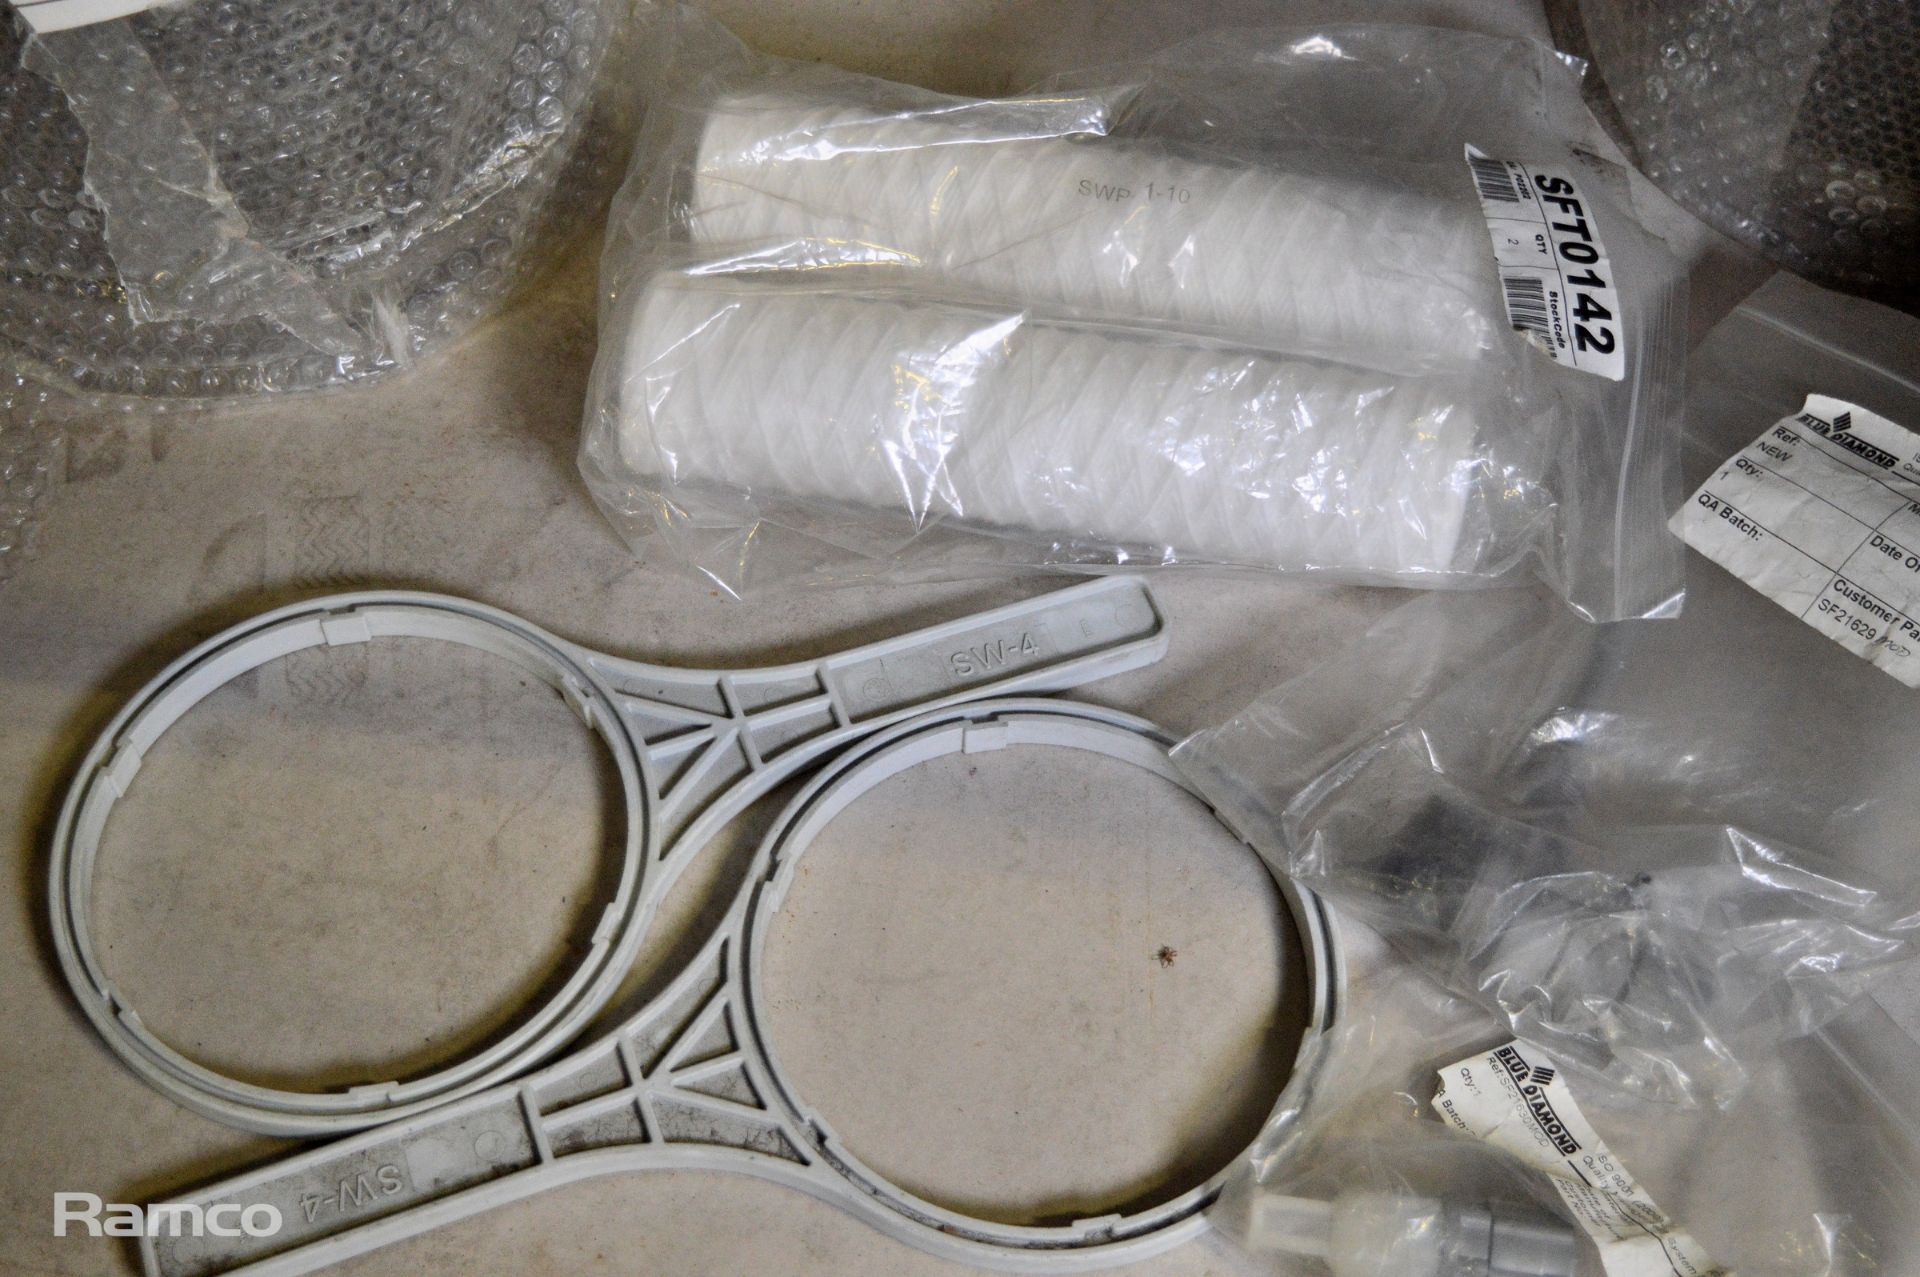 Water Filters and Strainers to Include - 5x Stella Meta Limited Basket Strainer Kit - Image 4 of 4